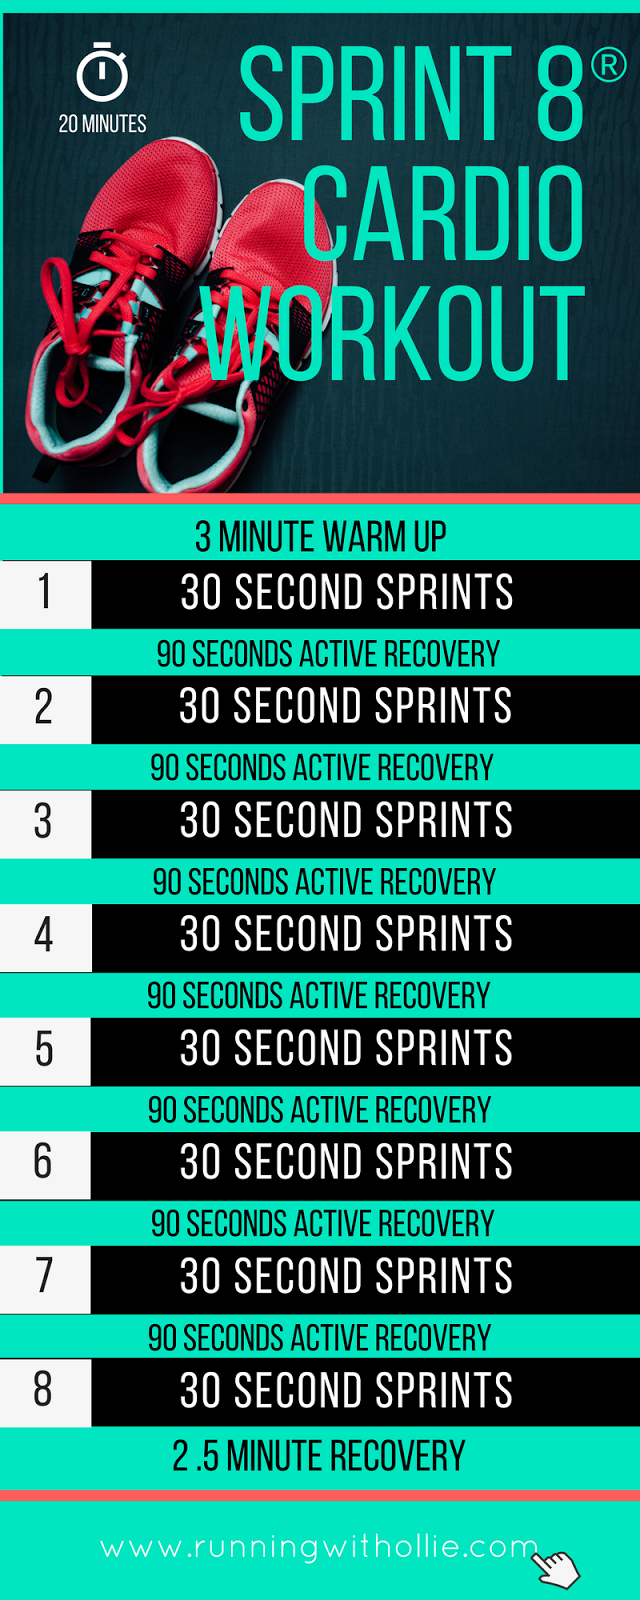 6 Day Sprint 8 Workout with Comfort Workout Clothes